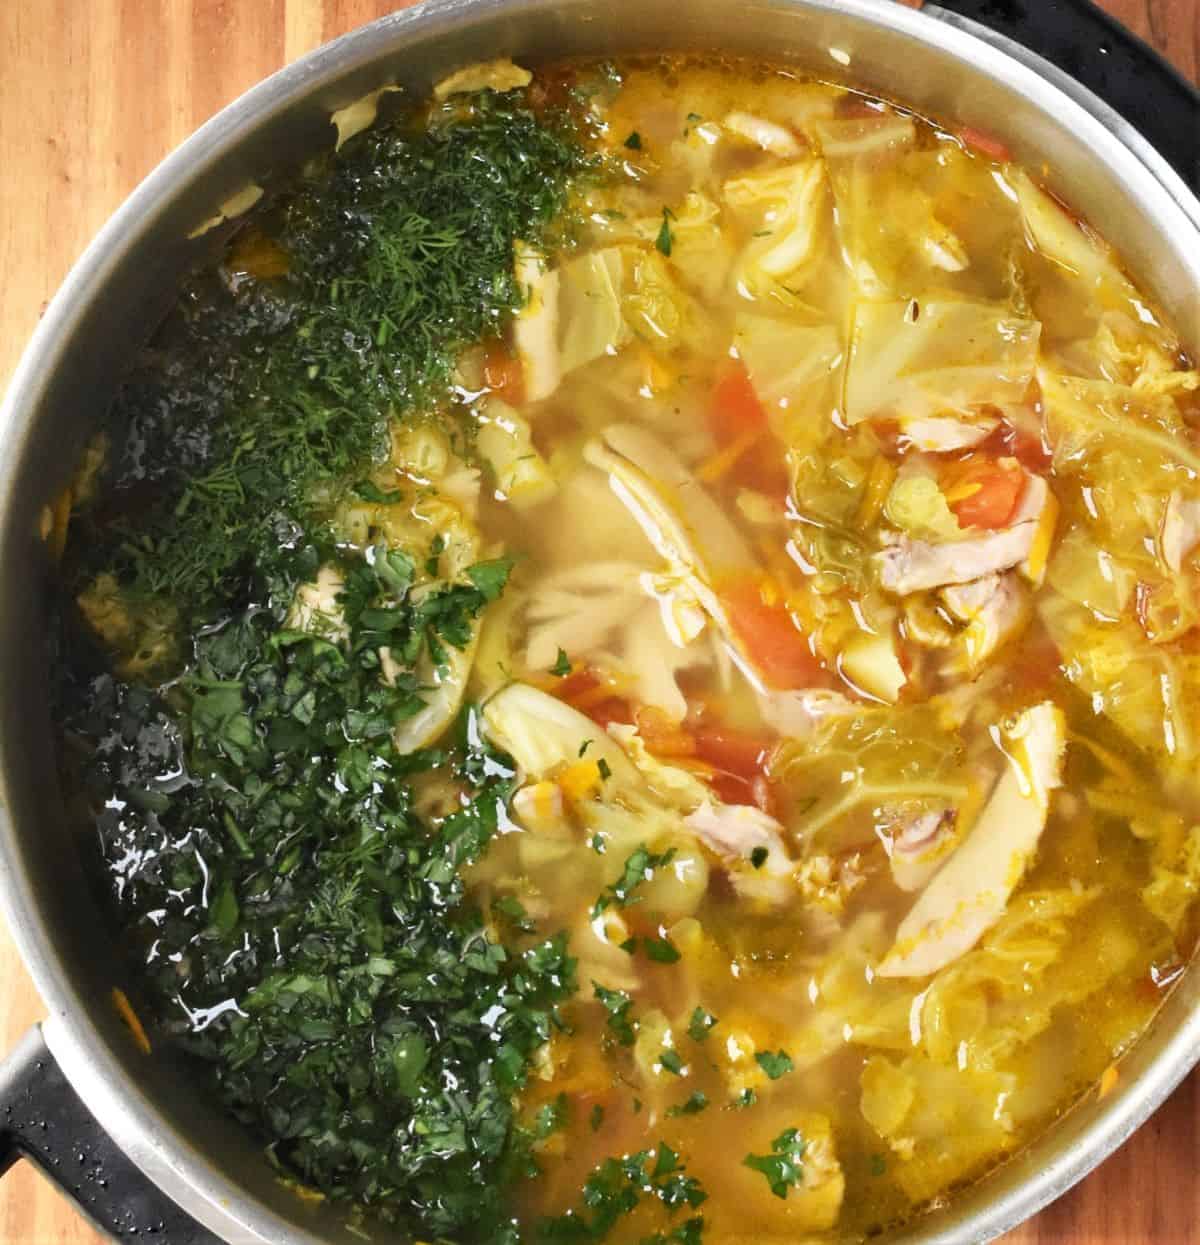 Cabbage and chicken soup with fresh herbs in large pot.